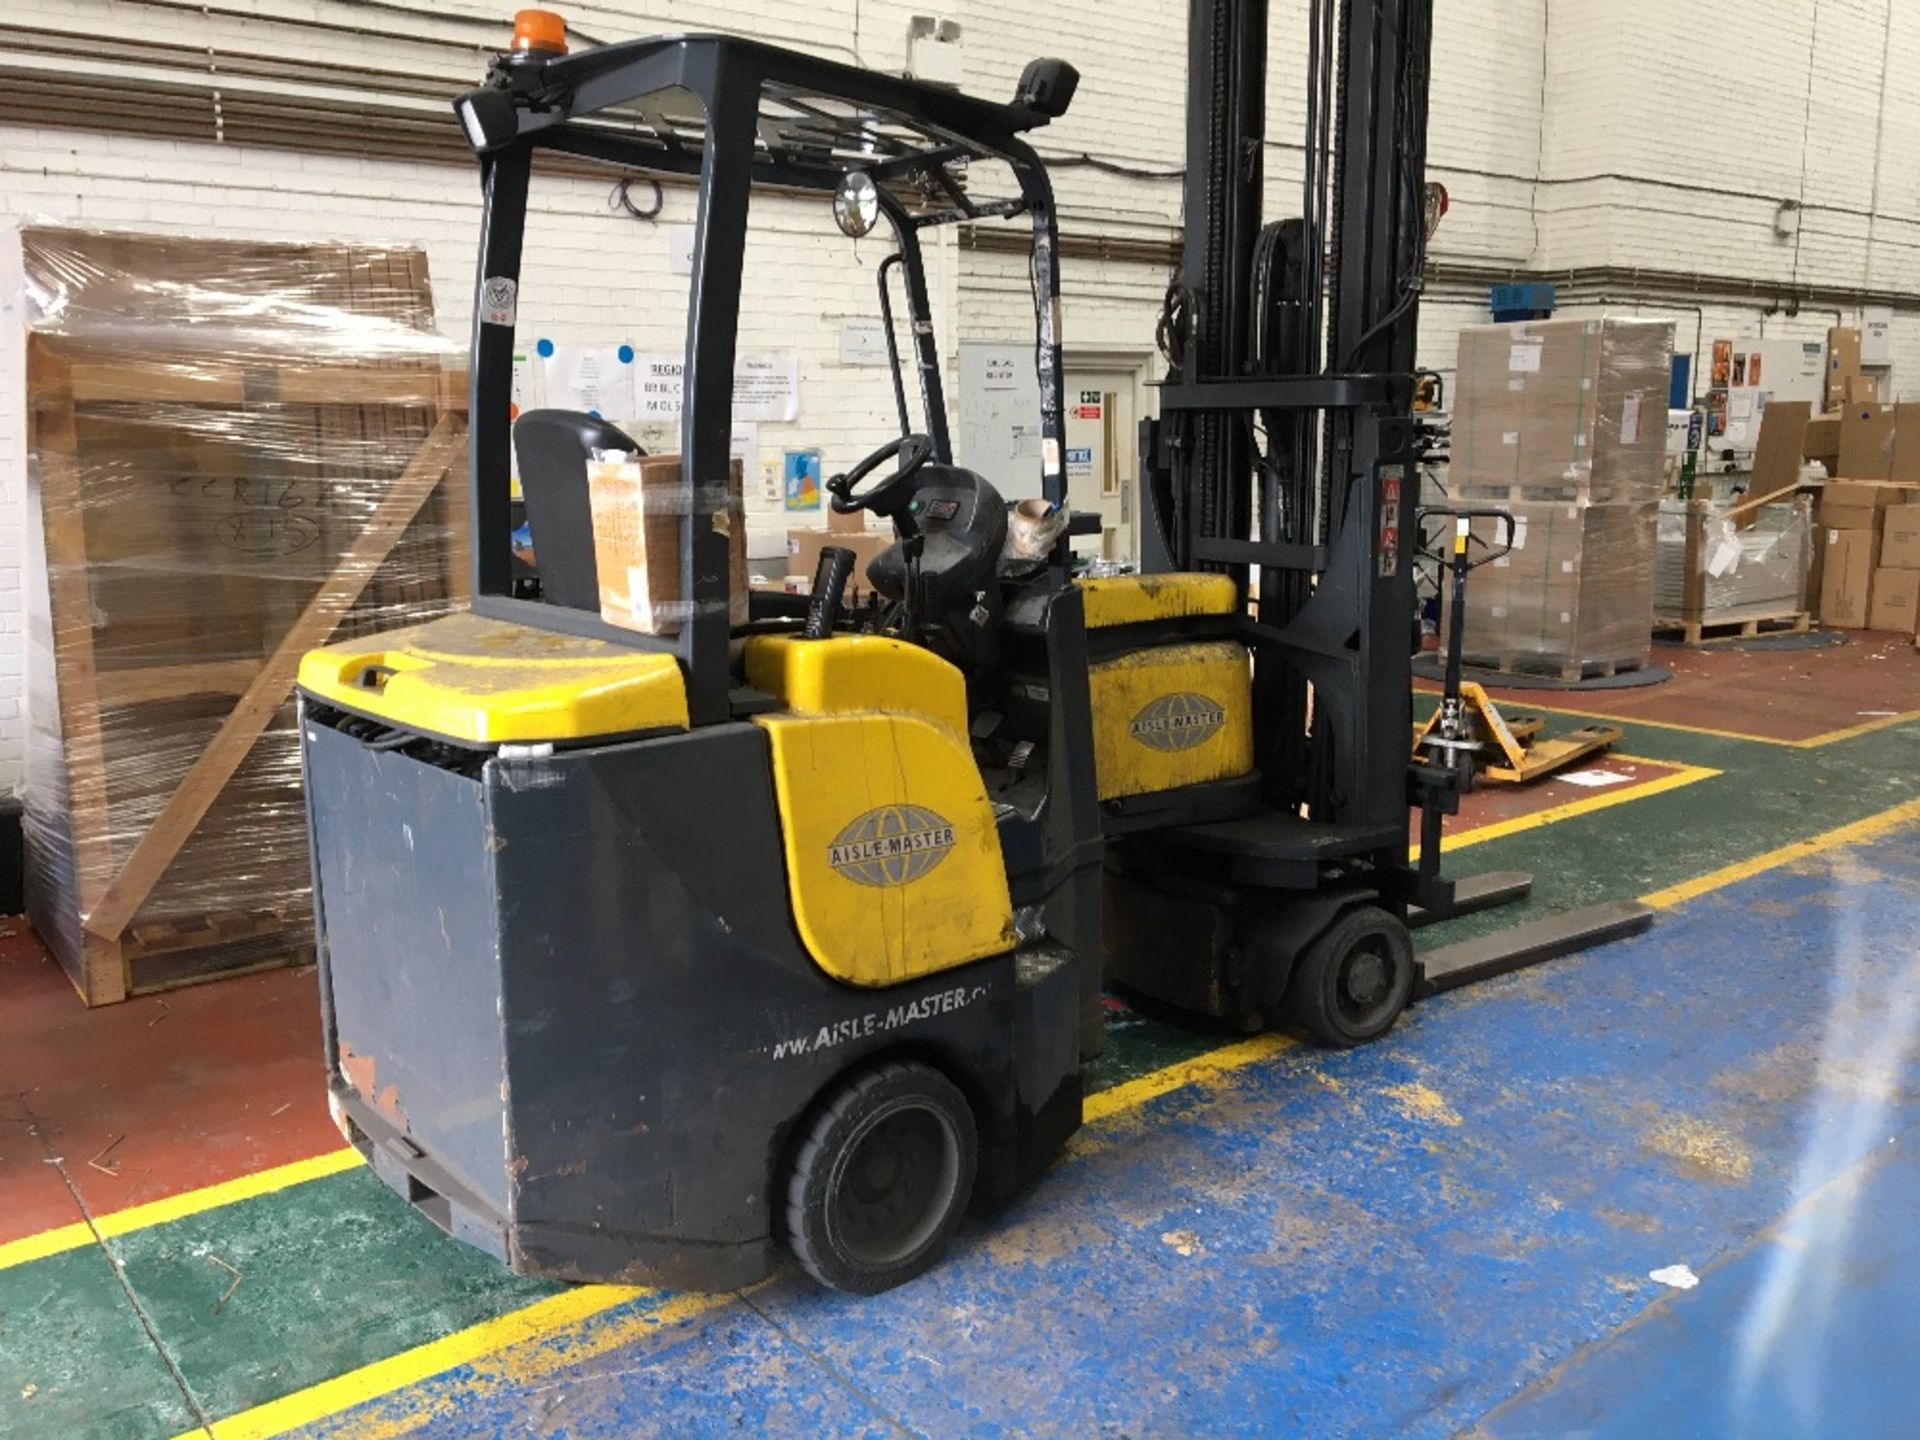 Aisle-Master 20SHE 2000kg capacity battery operated forklift truck